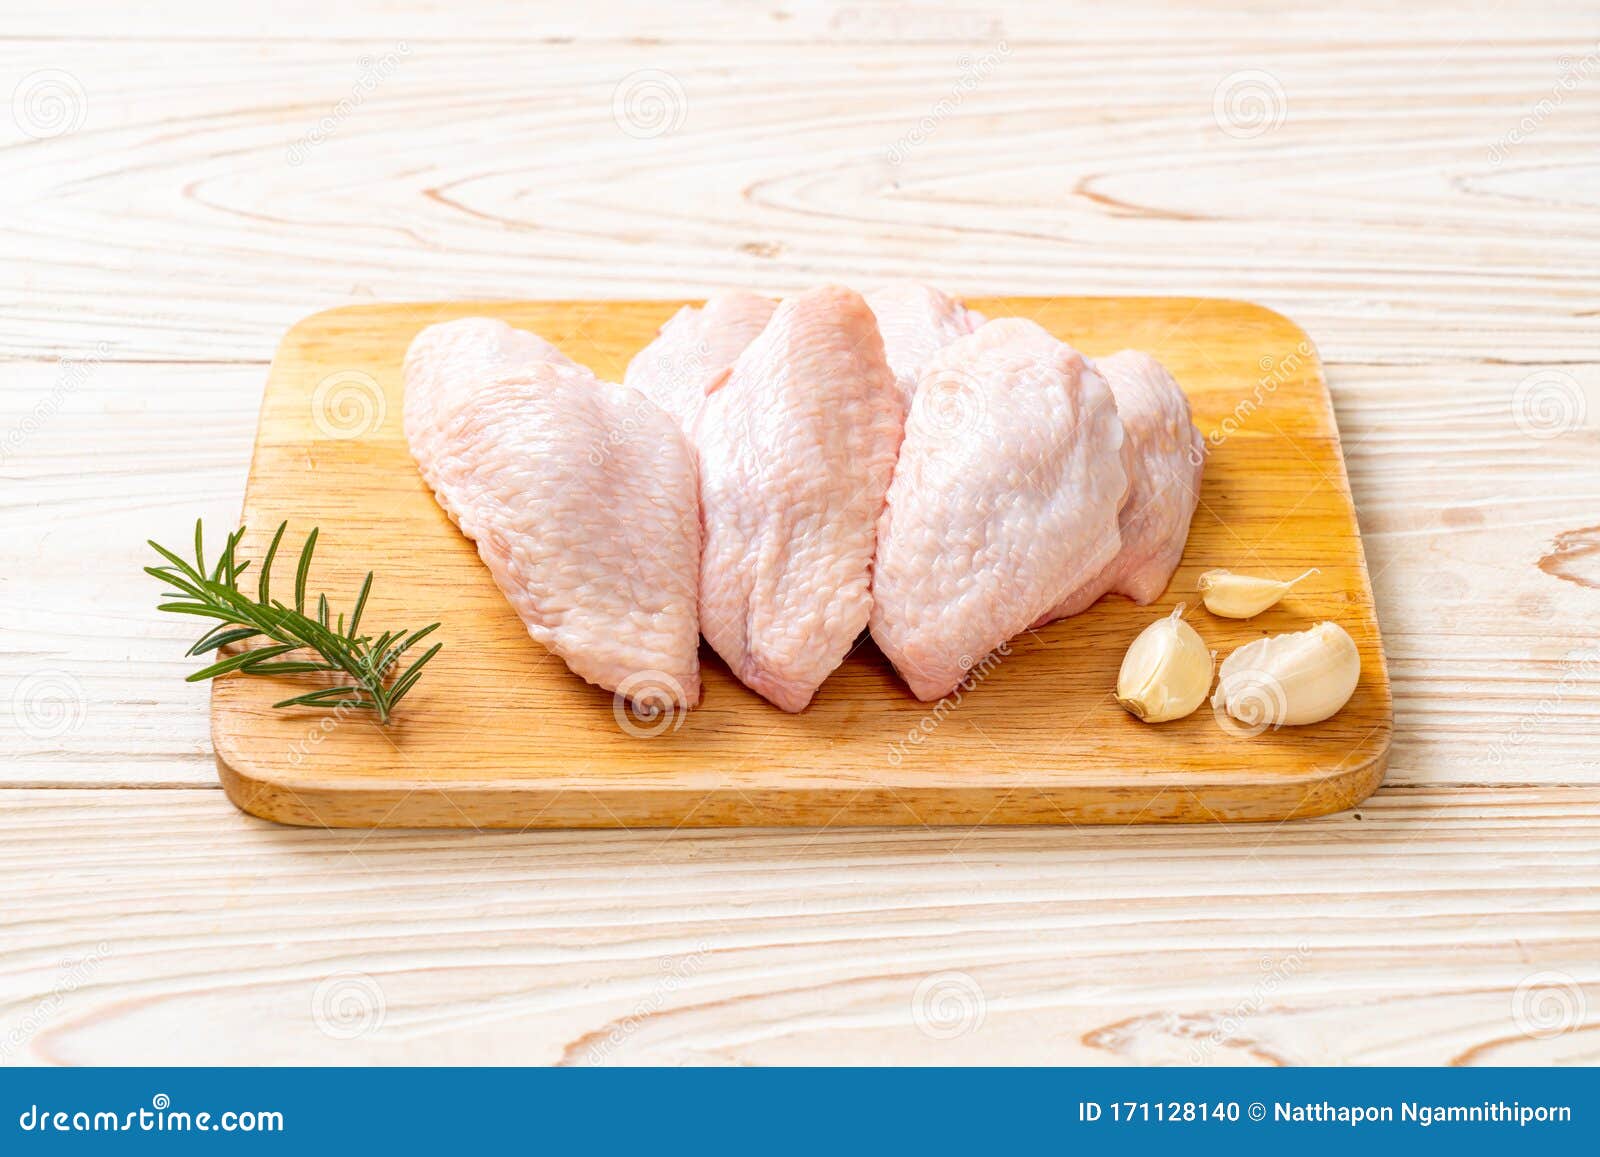 Fresh Raw Middle Chicken Wings on Wooden Board Stock Photo - Image of ...